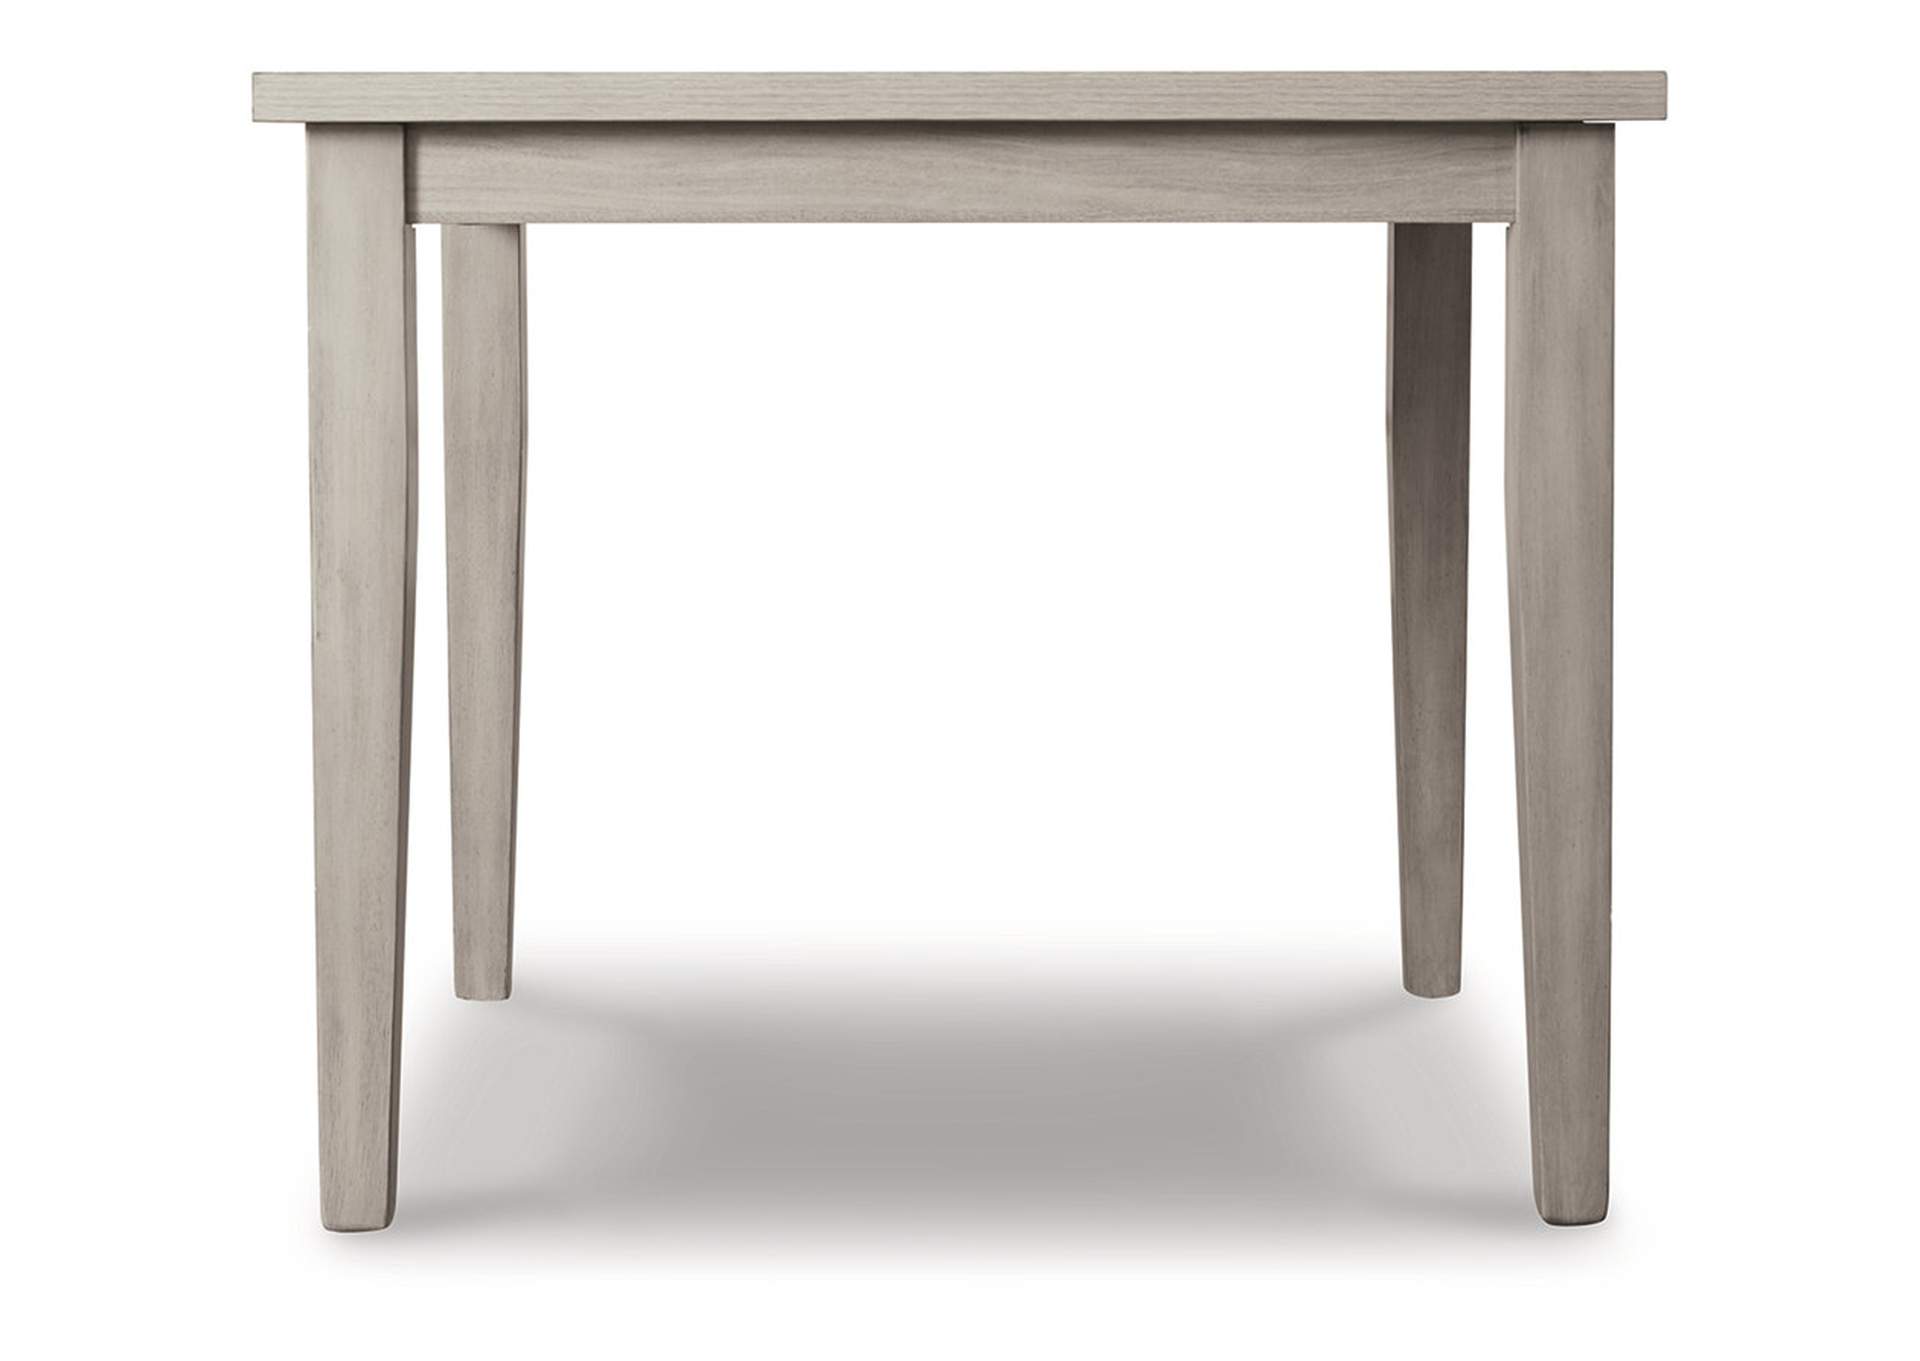 Loratti Dining Room Table,Direct To Consumer Express